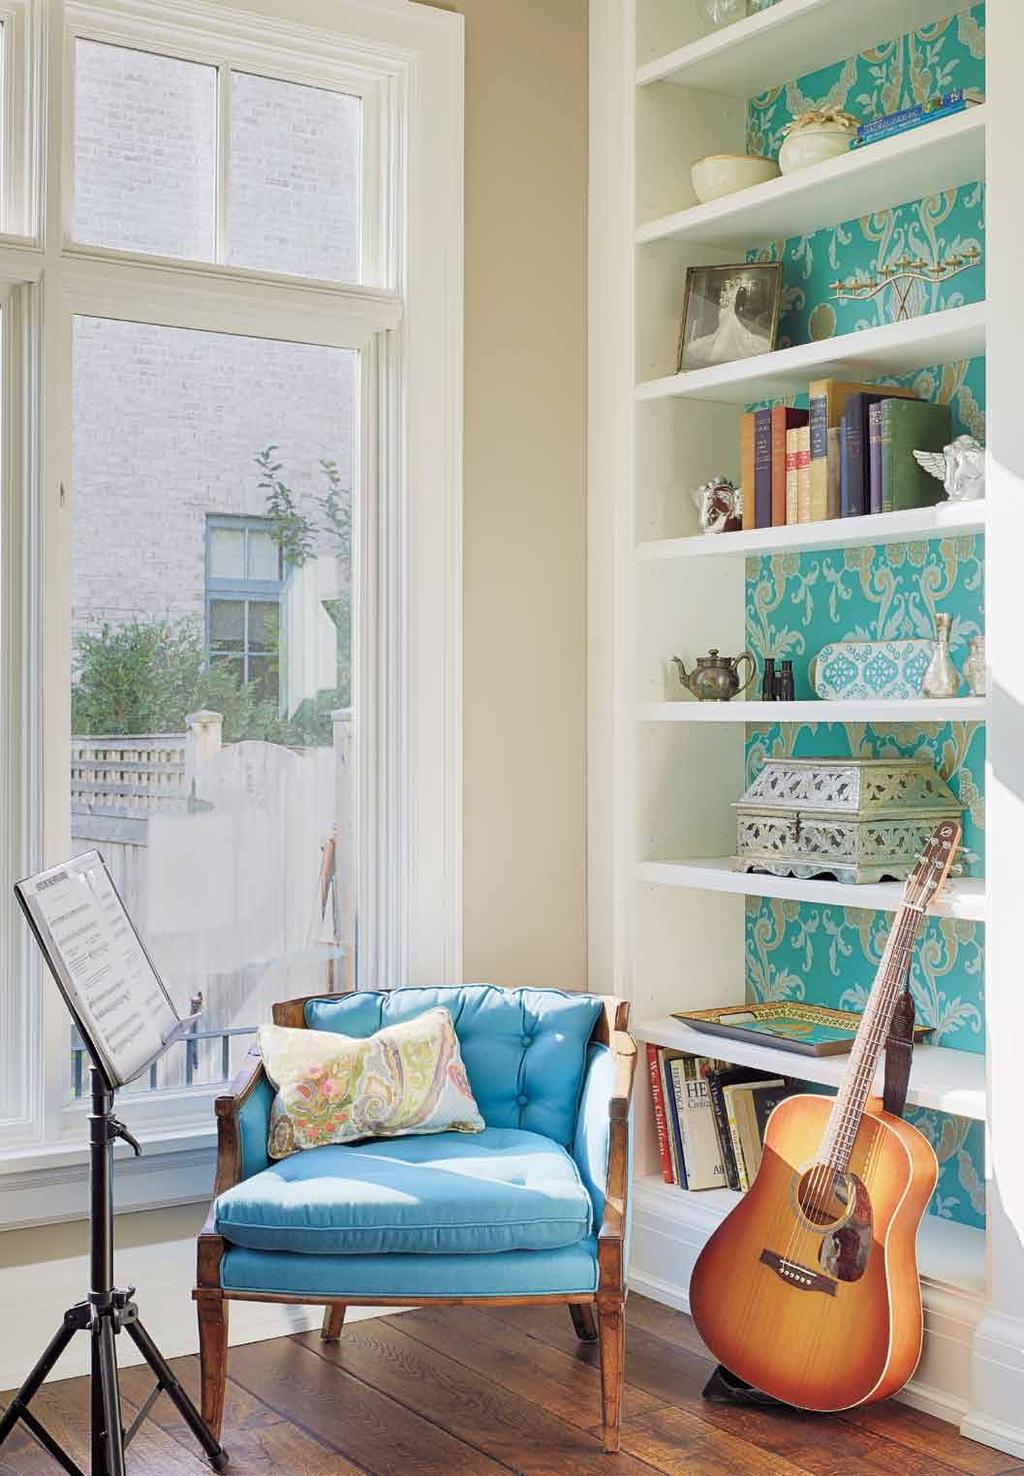 Opposite: For the music room, an antique chair was reupholstered in a vibrant Perennials